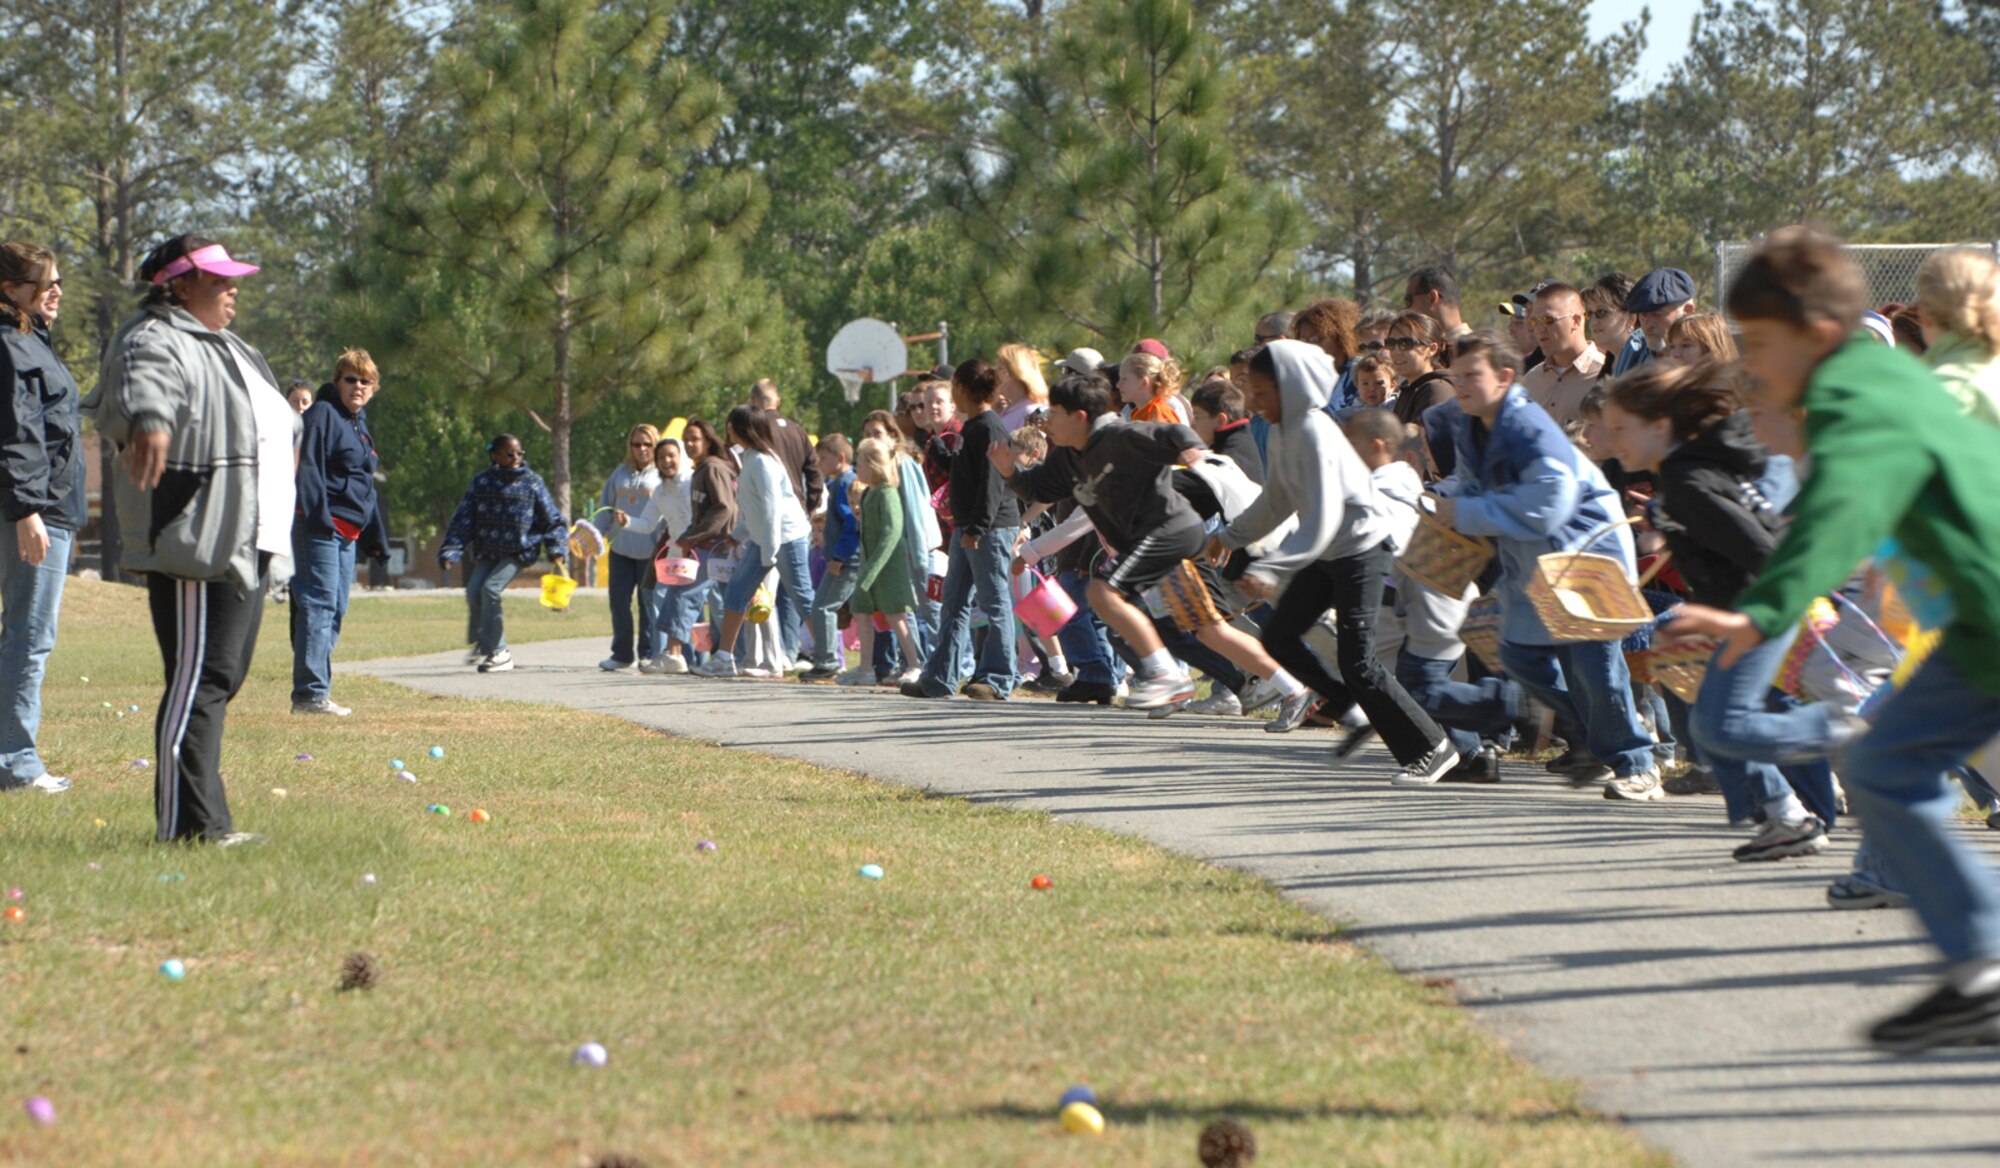 Team Moody children race to find their fair share of eggs during Moody's Easter Egg Hunt April 7. The event, is an held annually for children between the ages of 3 months to 12 years. (U.S. Air Force photo by Staff Sgt. Joshua Jasper)